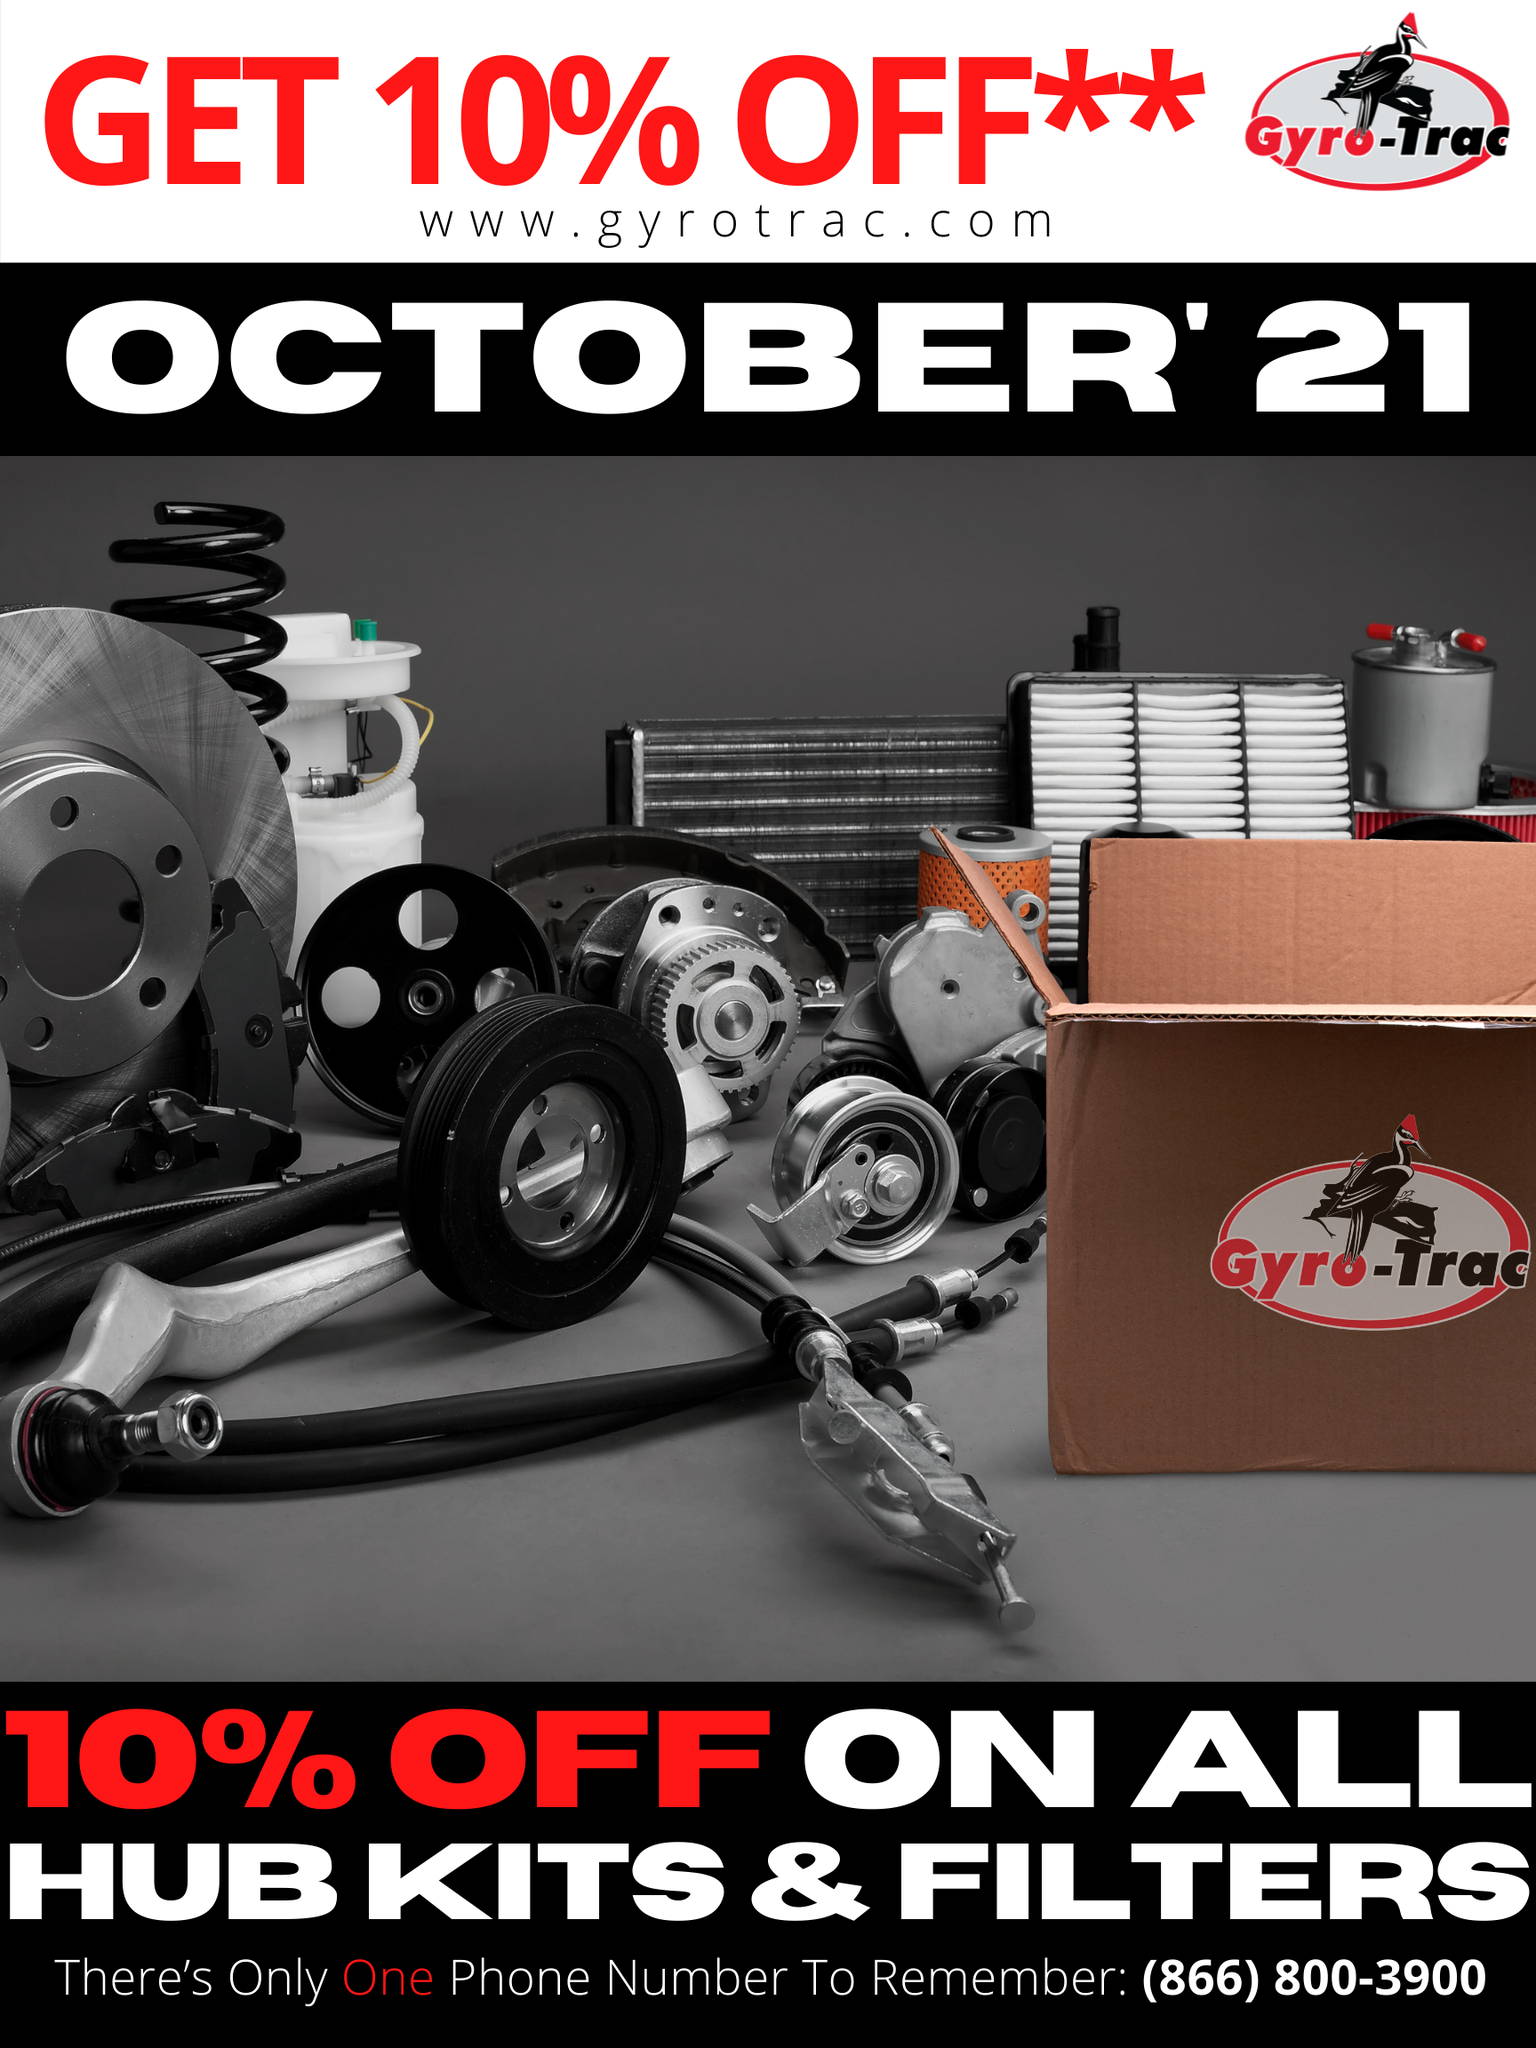 For the month of October 2021, Get 10% Off on All Hub Kits & Filters.